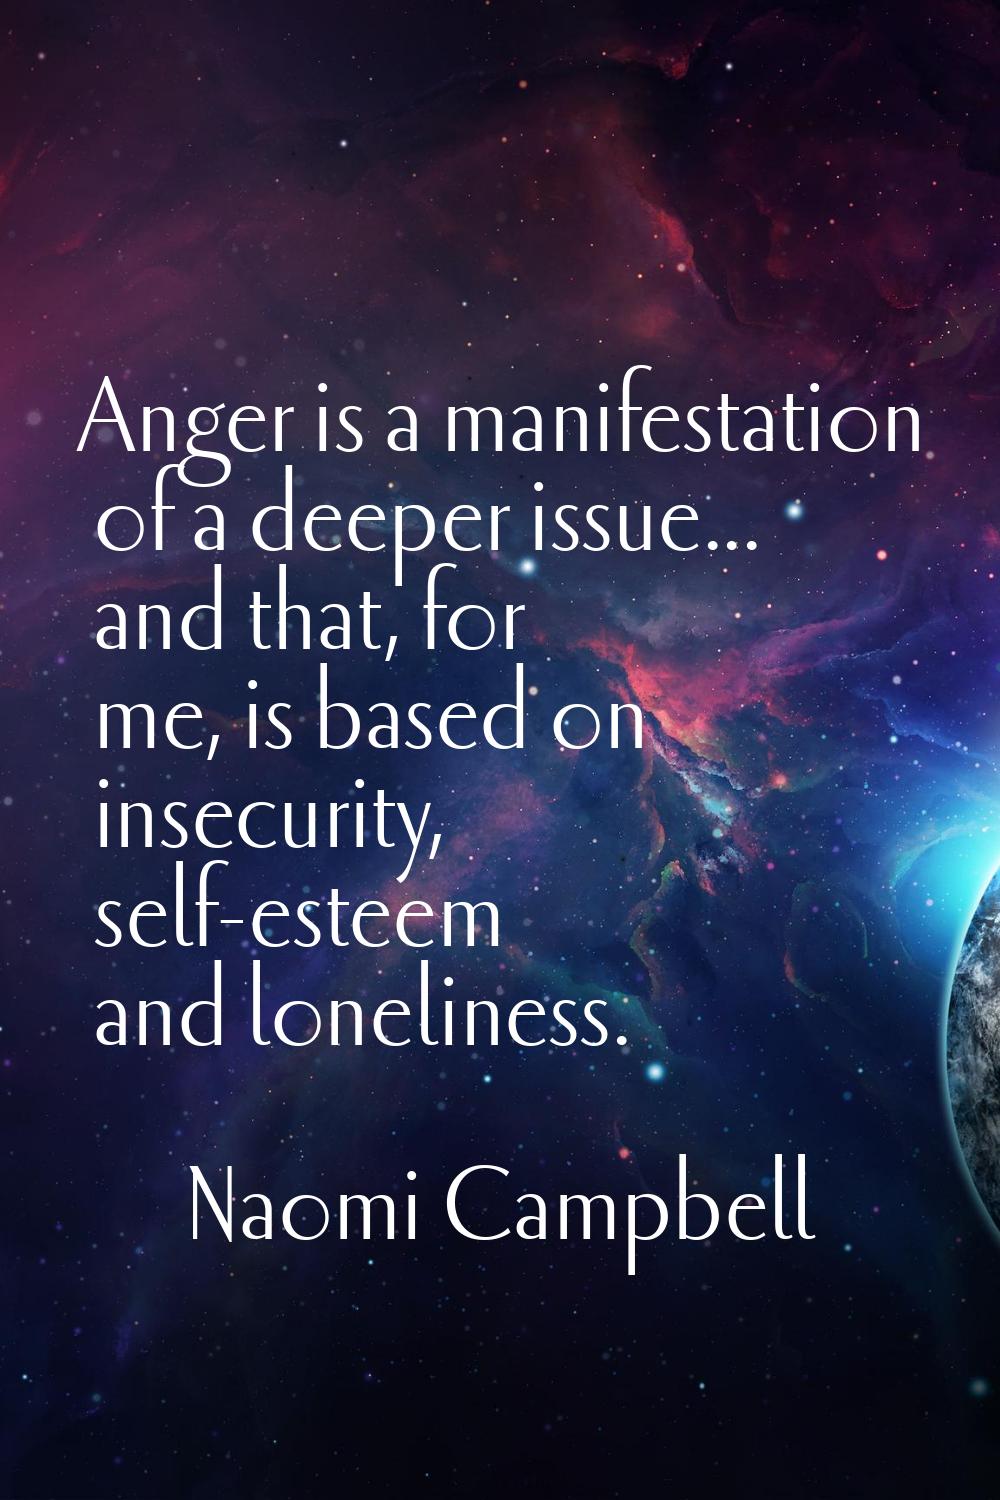 Anger is a manifestation of a deeper issue... and that, for me, is based on insecurity, self-esteem